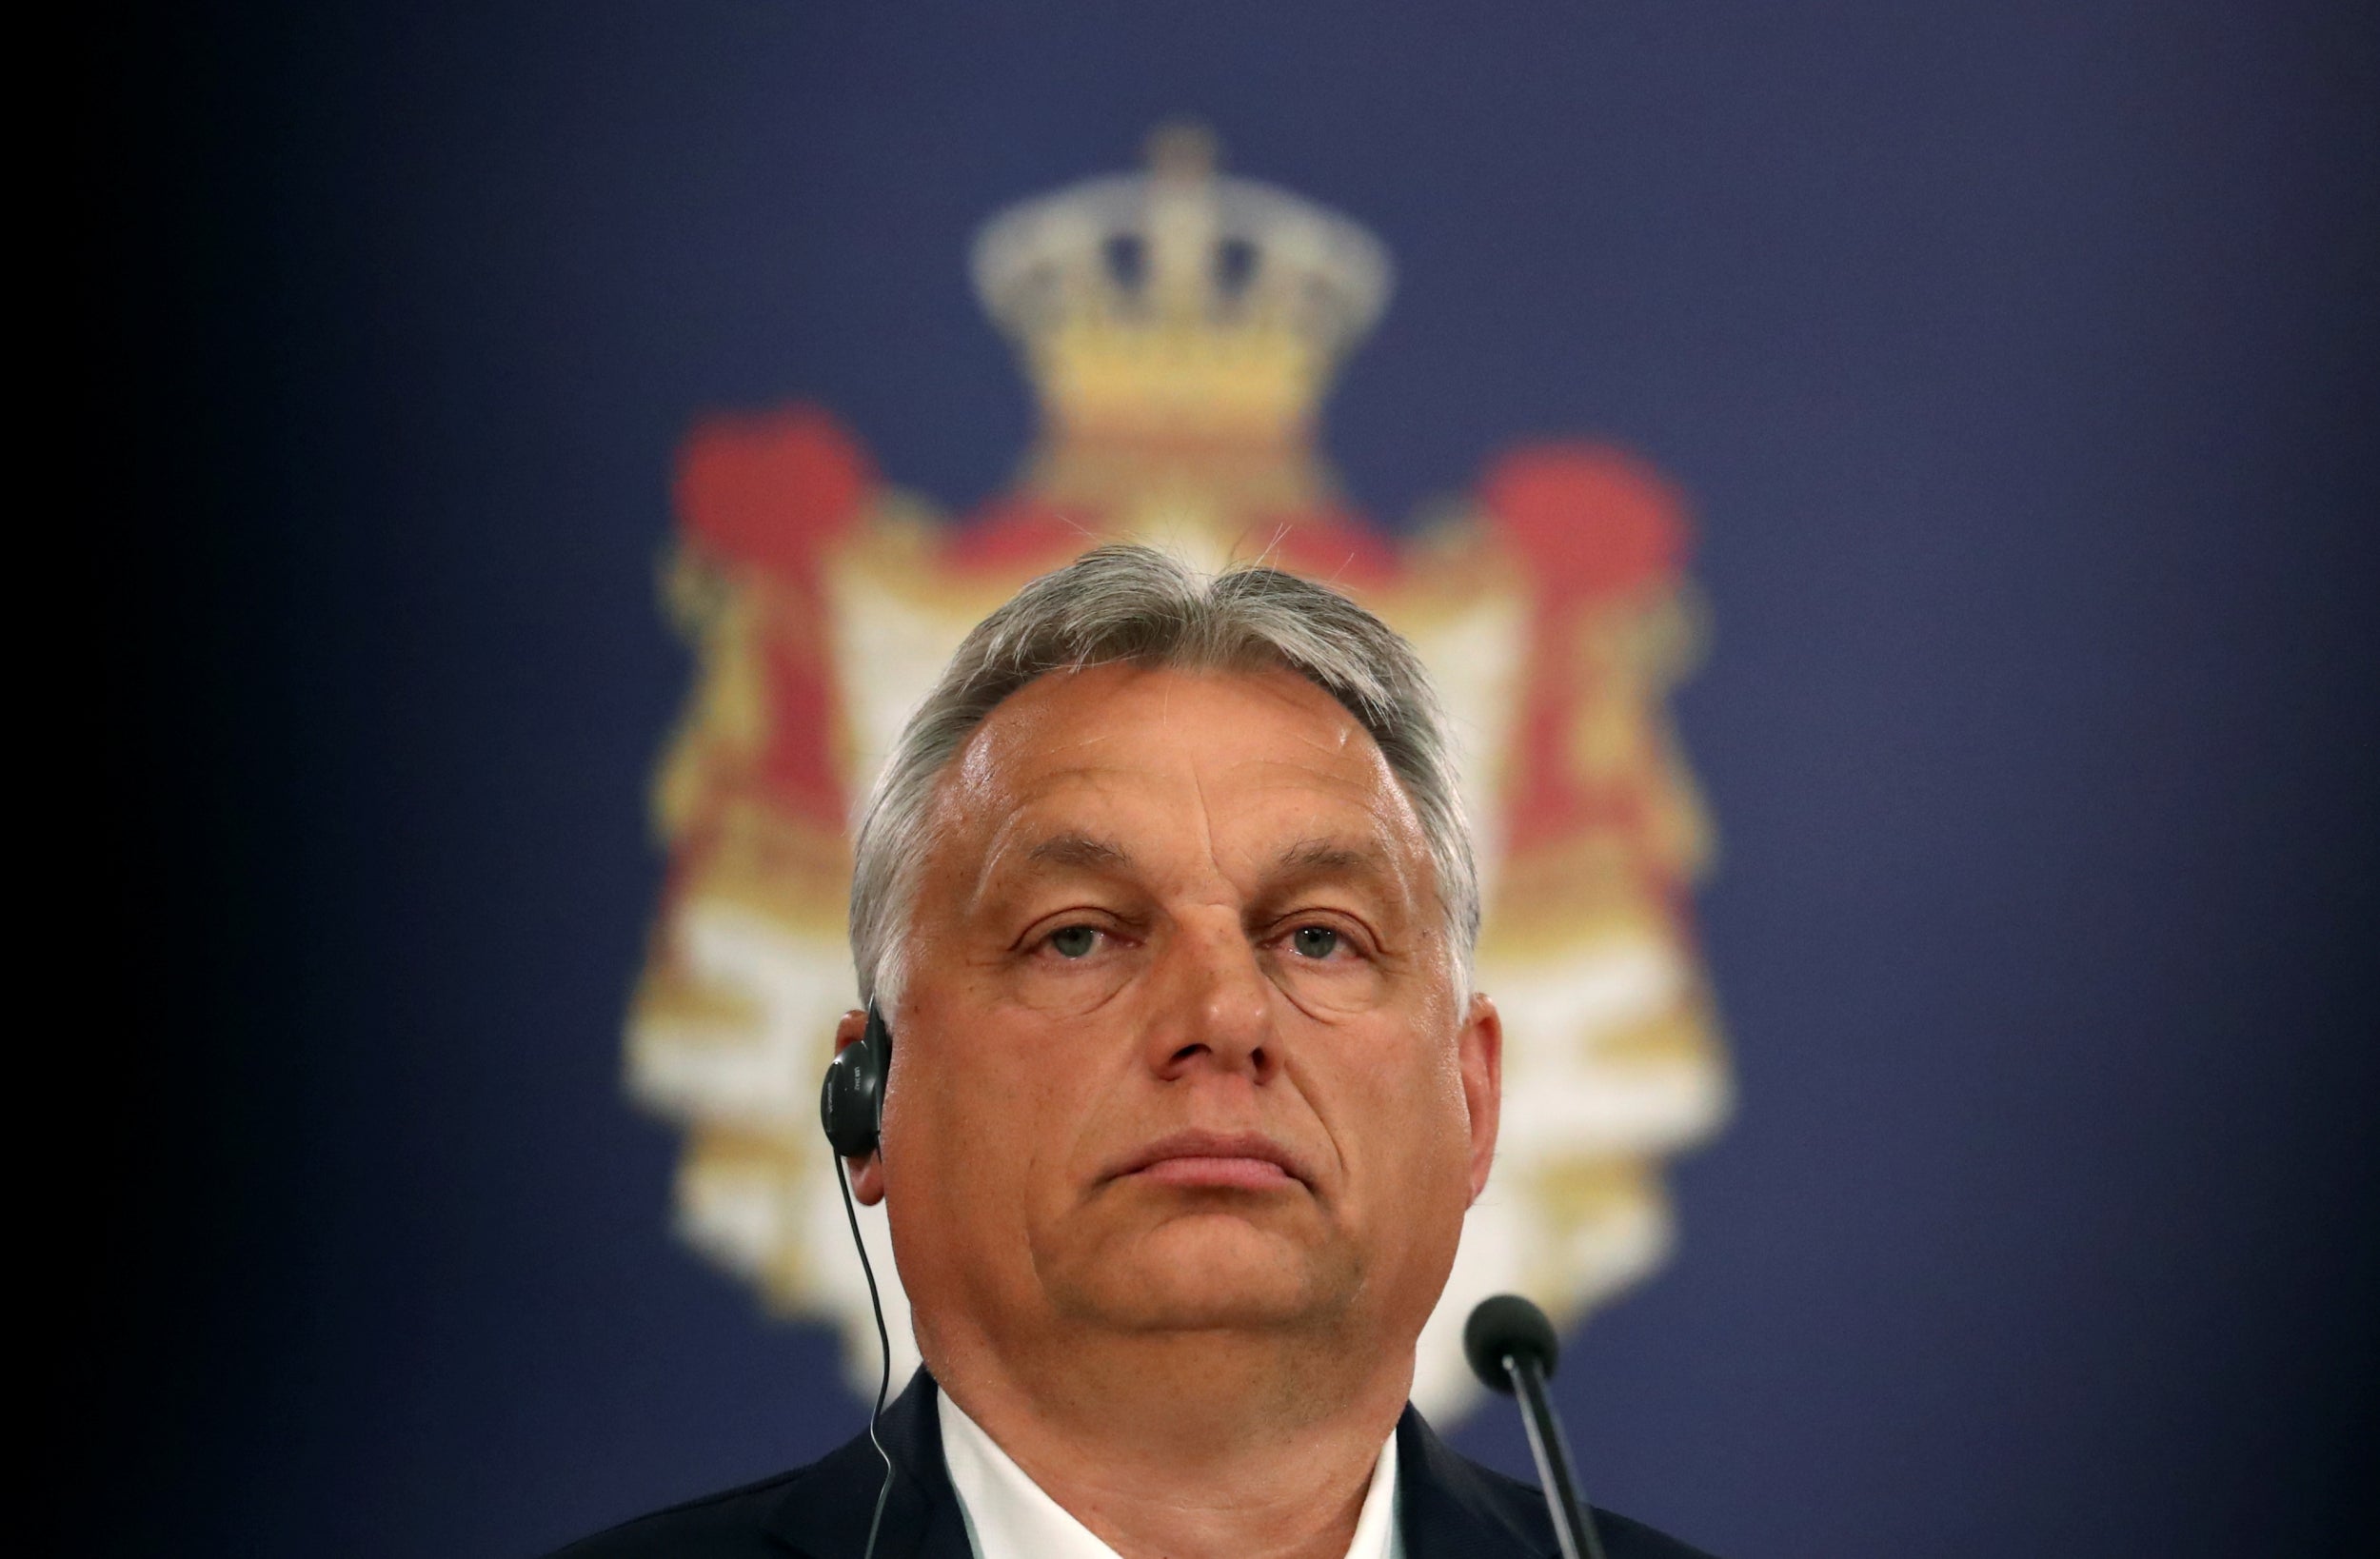 Prime Minister Viktor Orban leads Hungary’s right-wing parliament